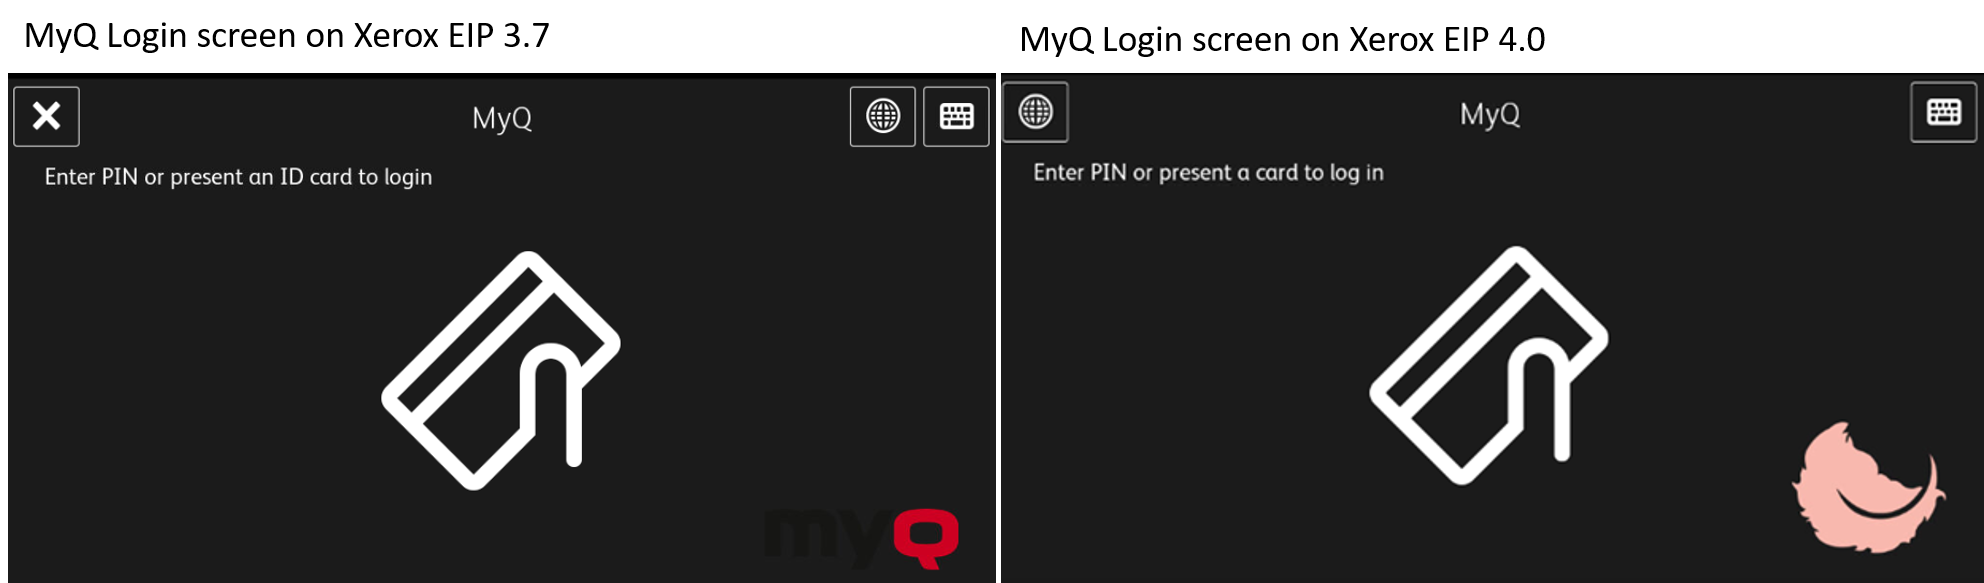 MyQ Login screen on EIP 3.7 and 4.0